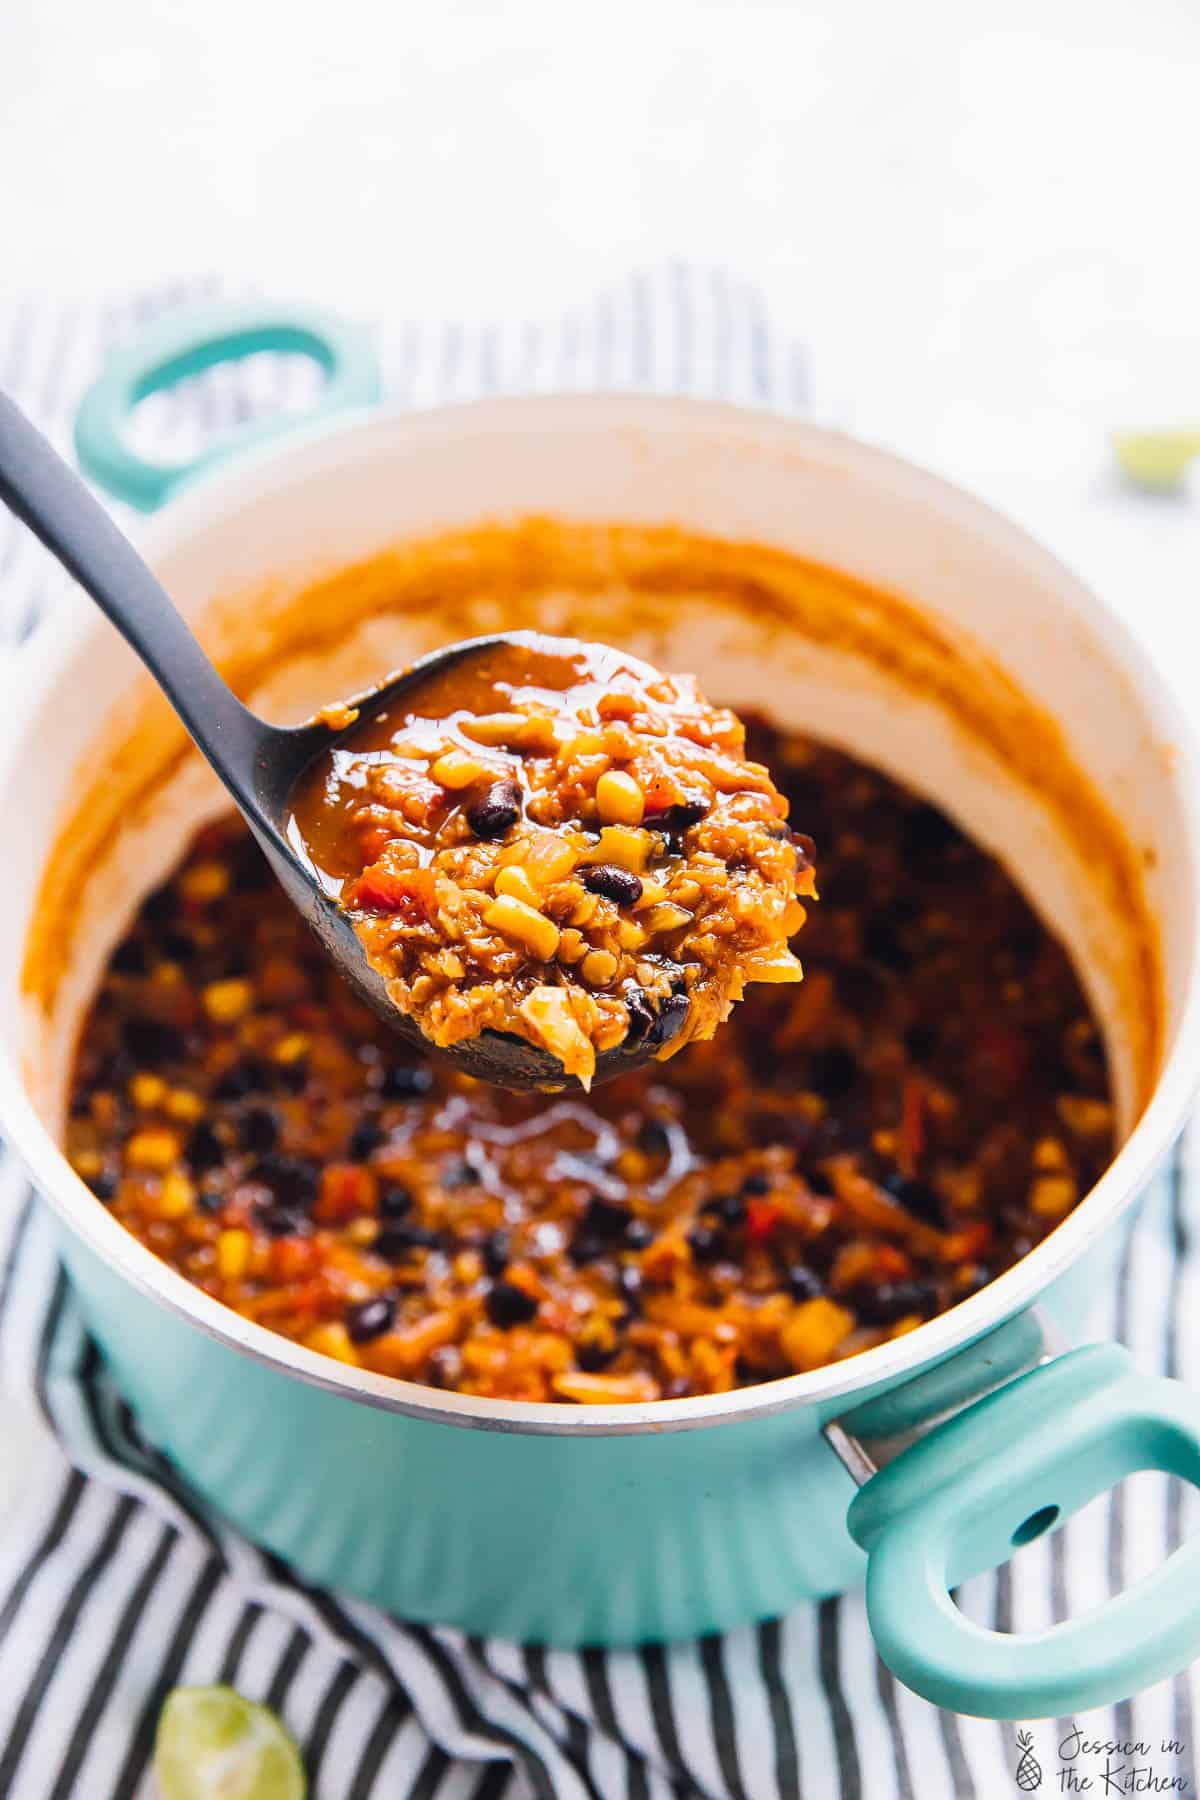 A ladle with some lentil chili, over a pot of lentil chili.